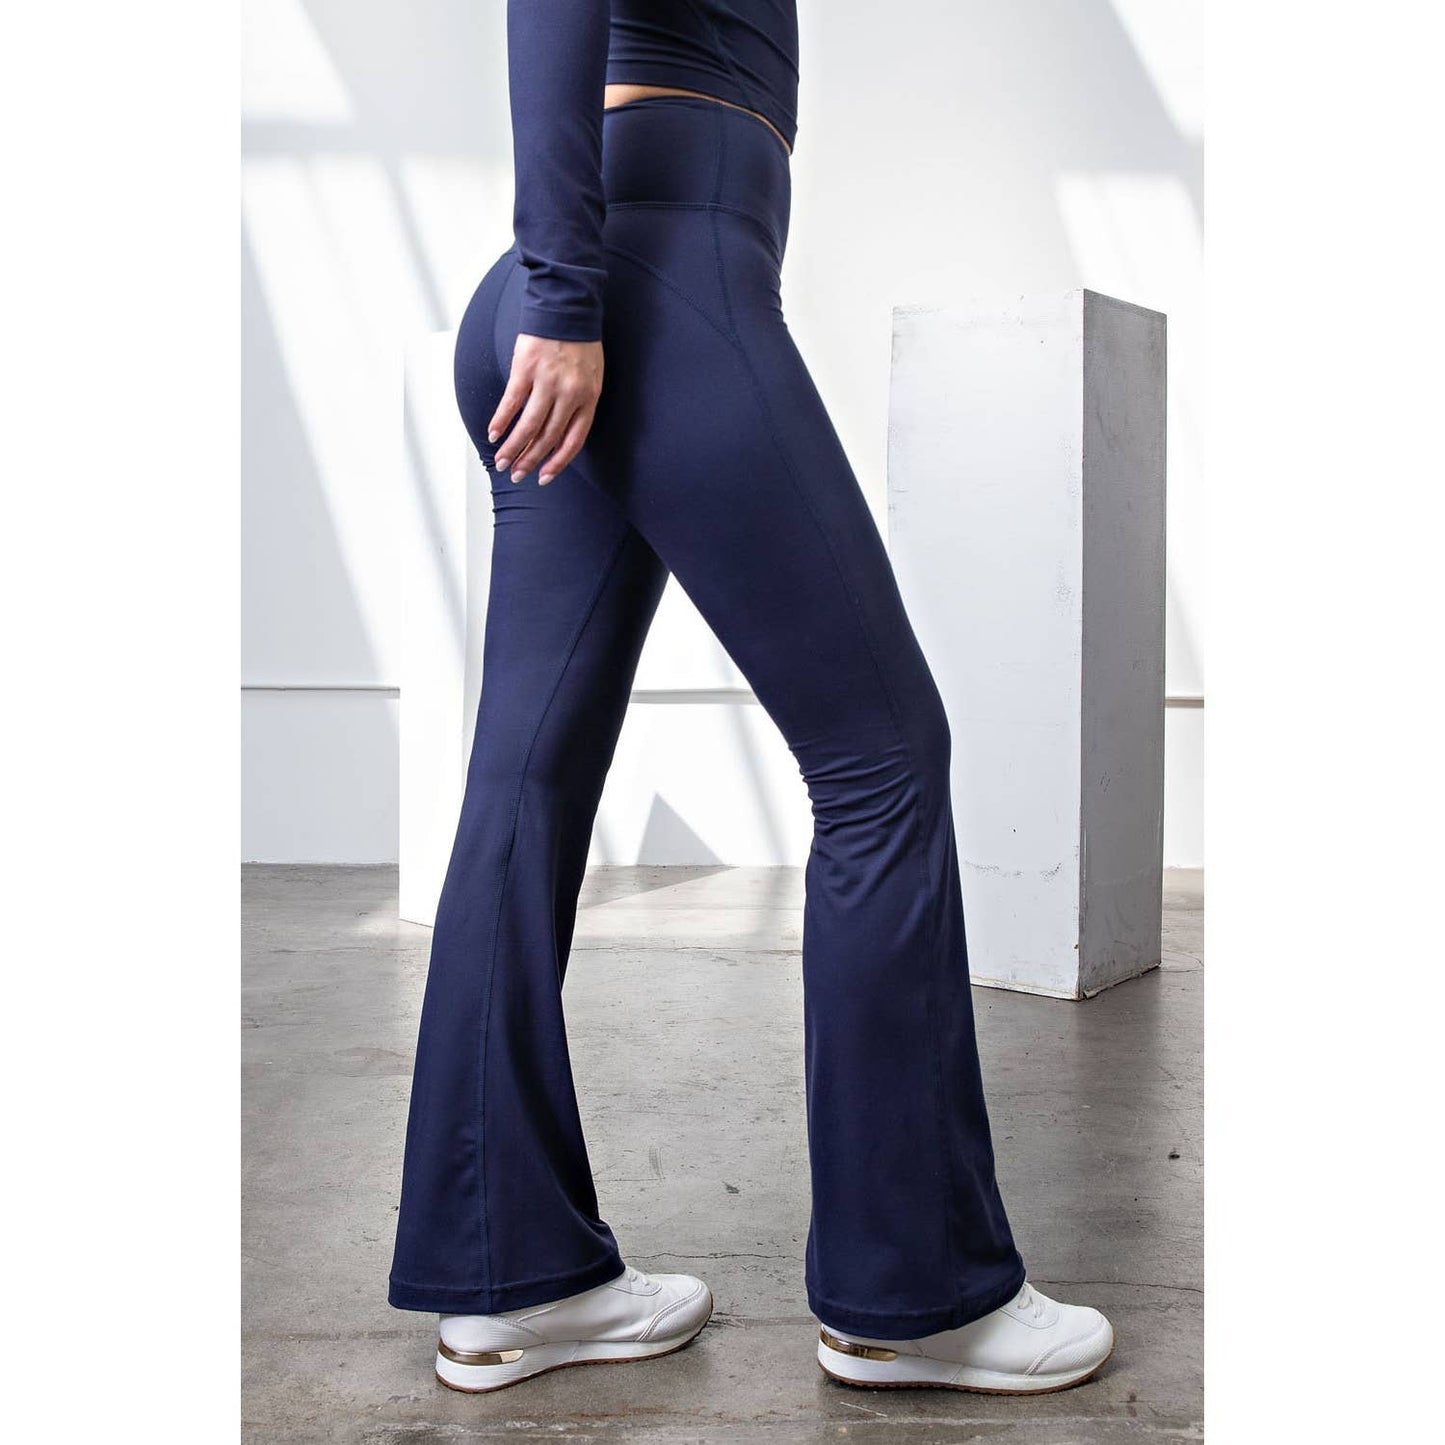 Flared Yoga Pants in Navy